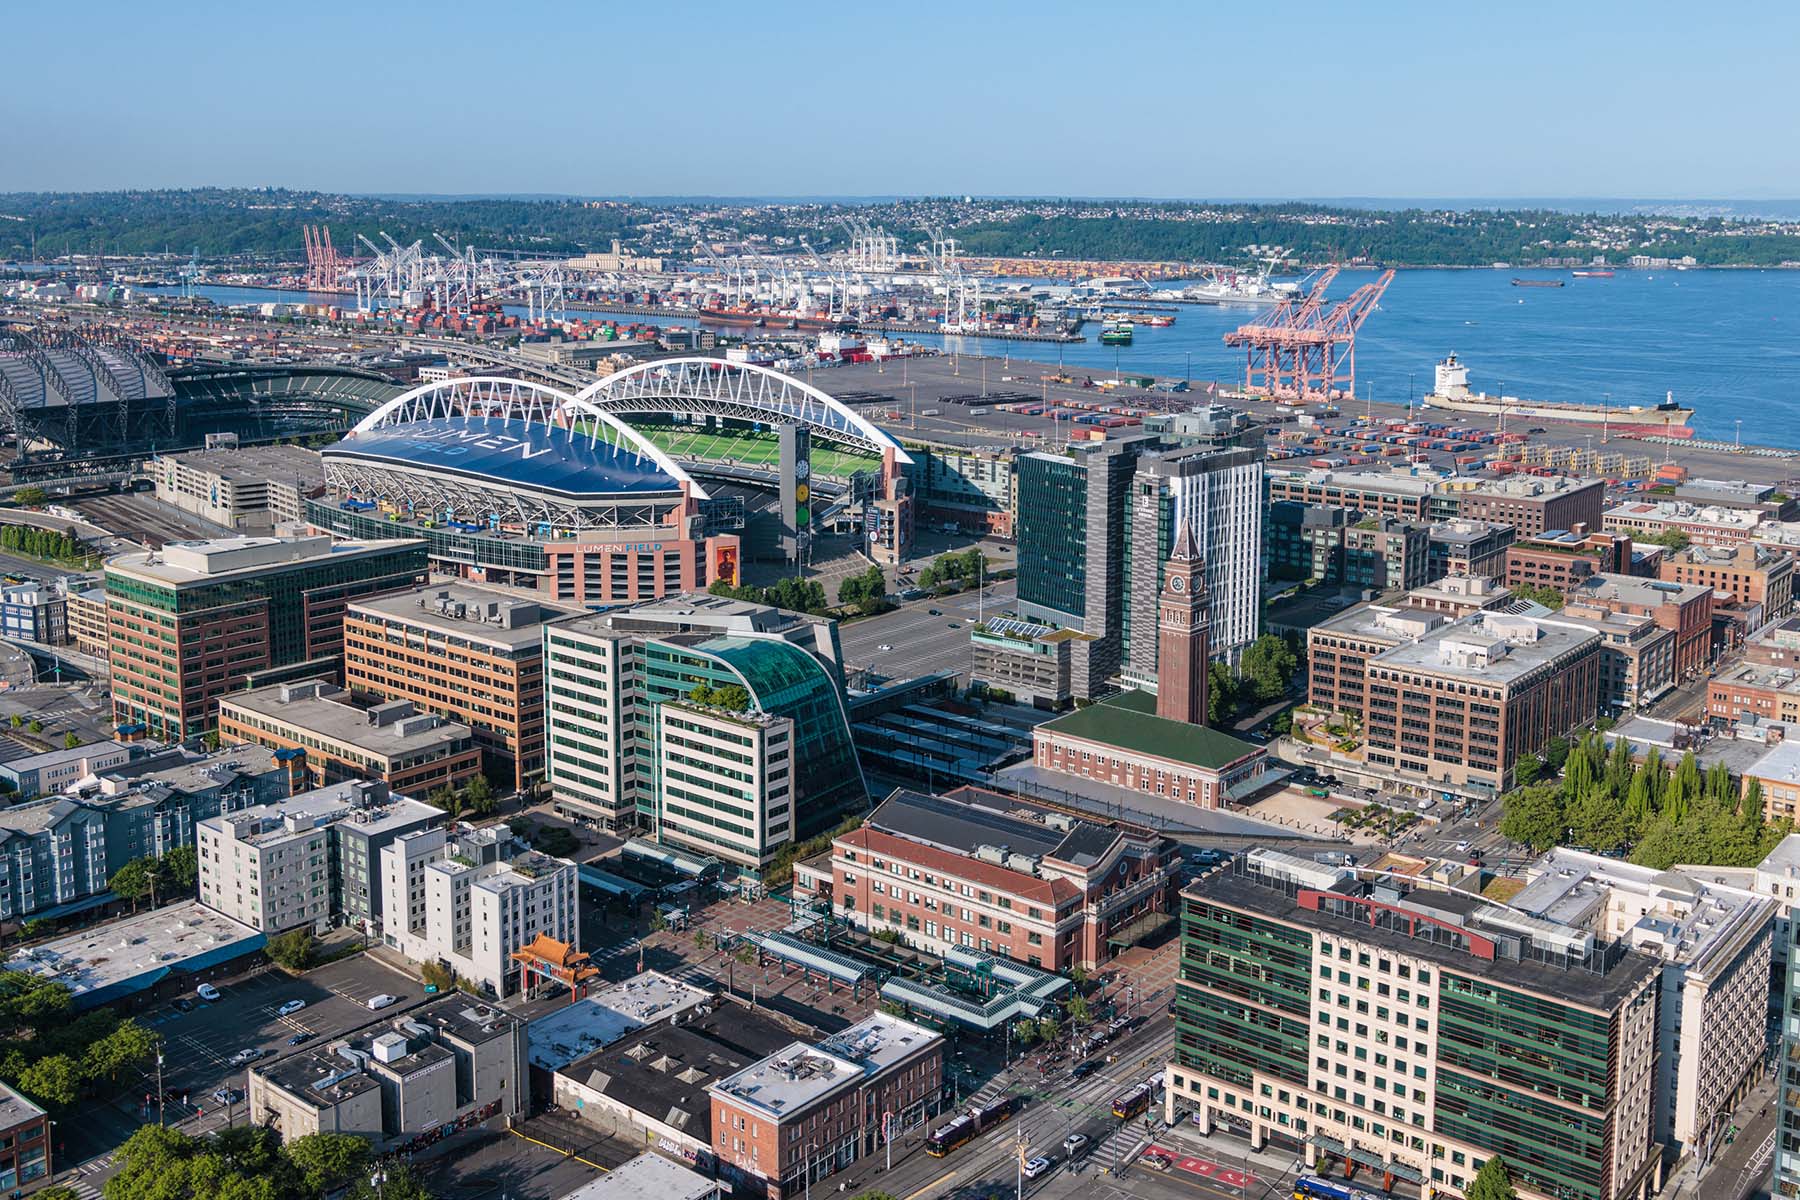 Aerial view of 505 Union Station and stadiums